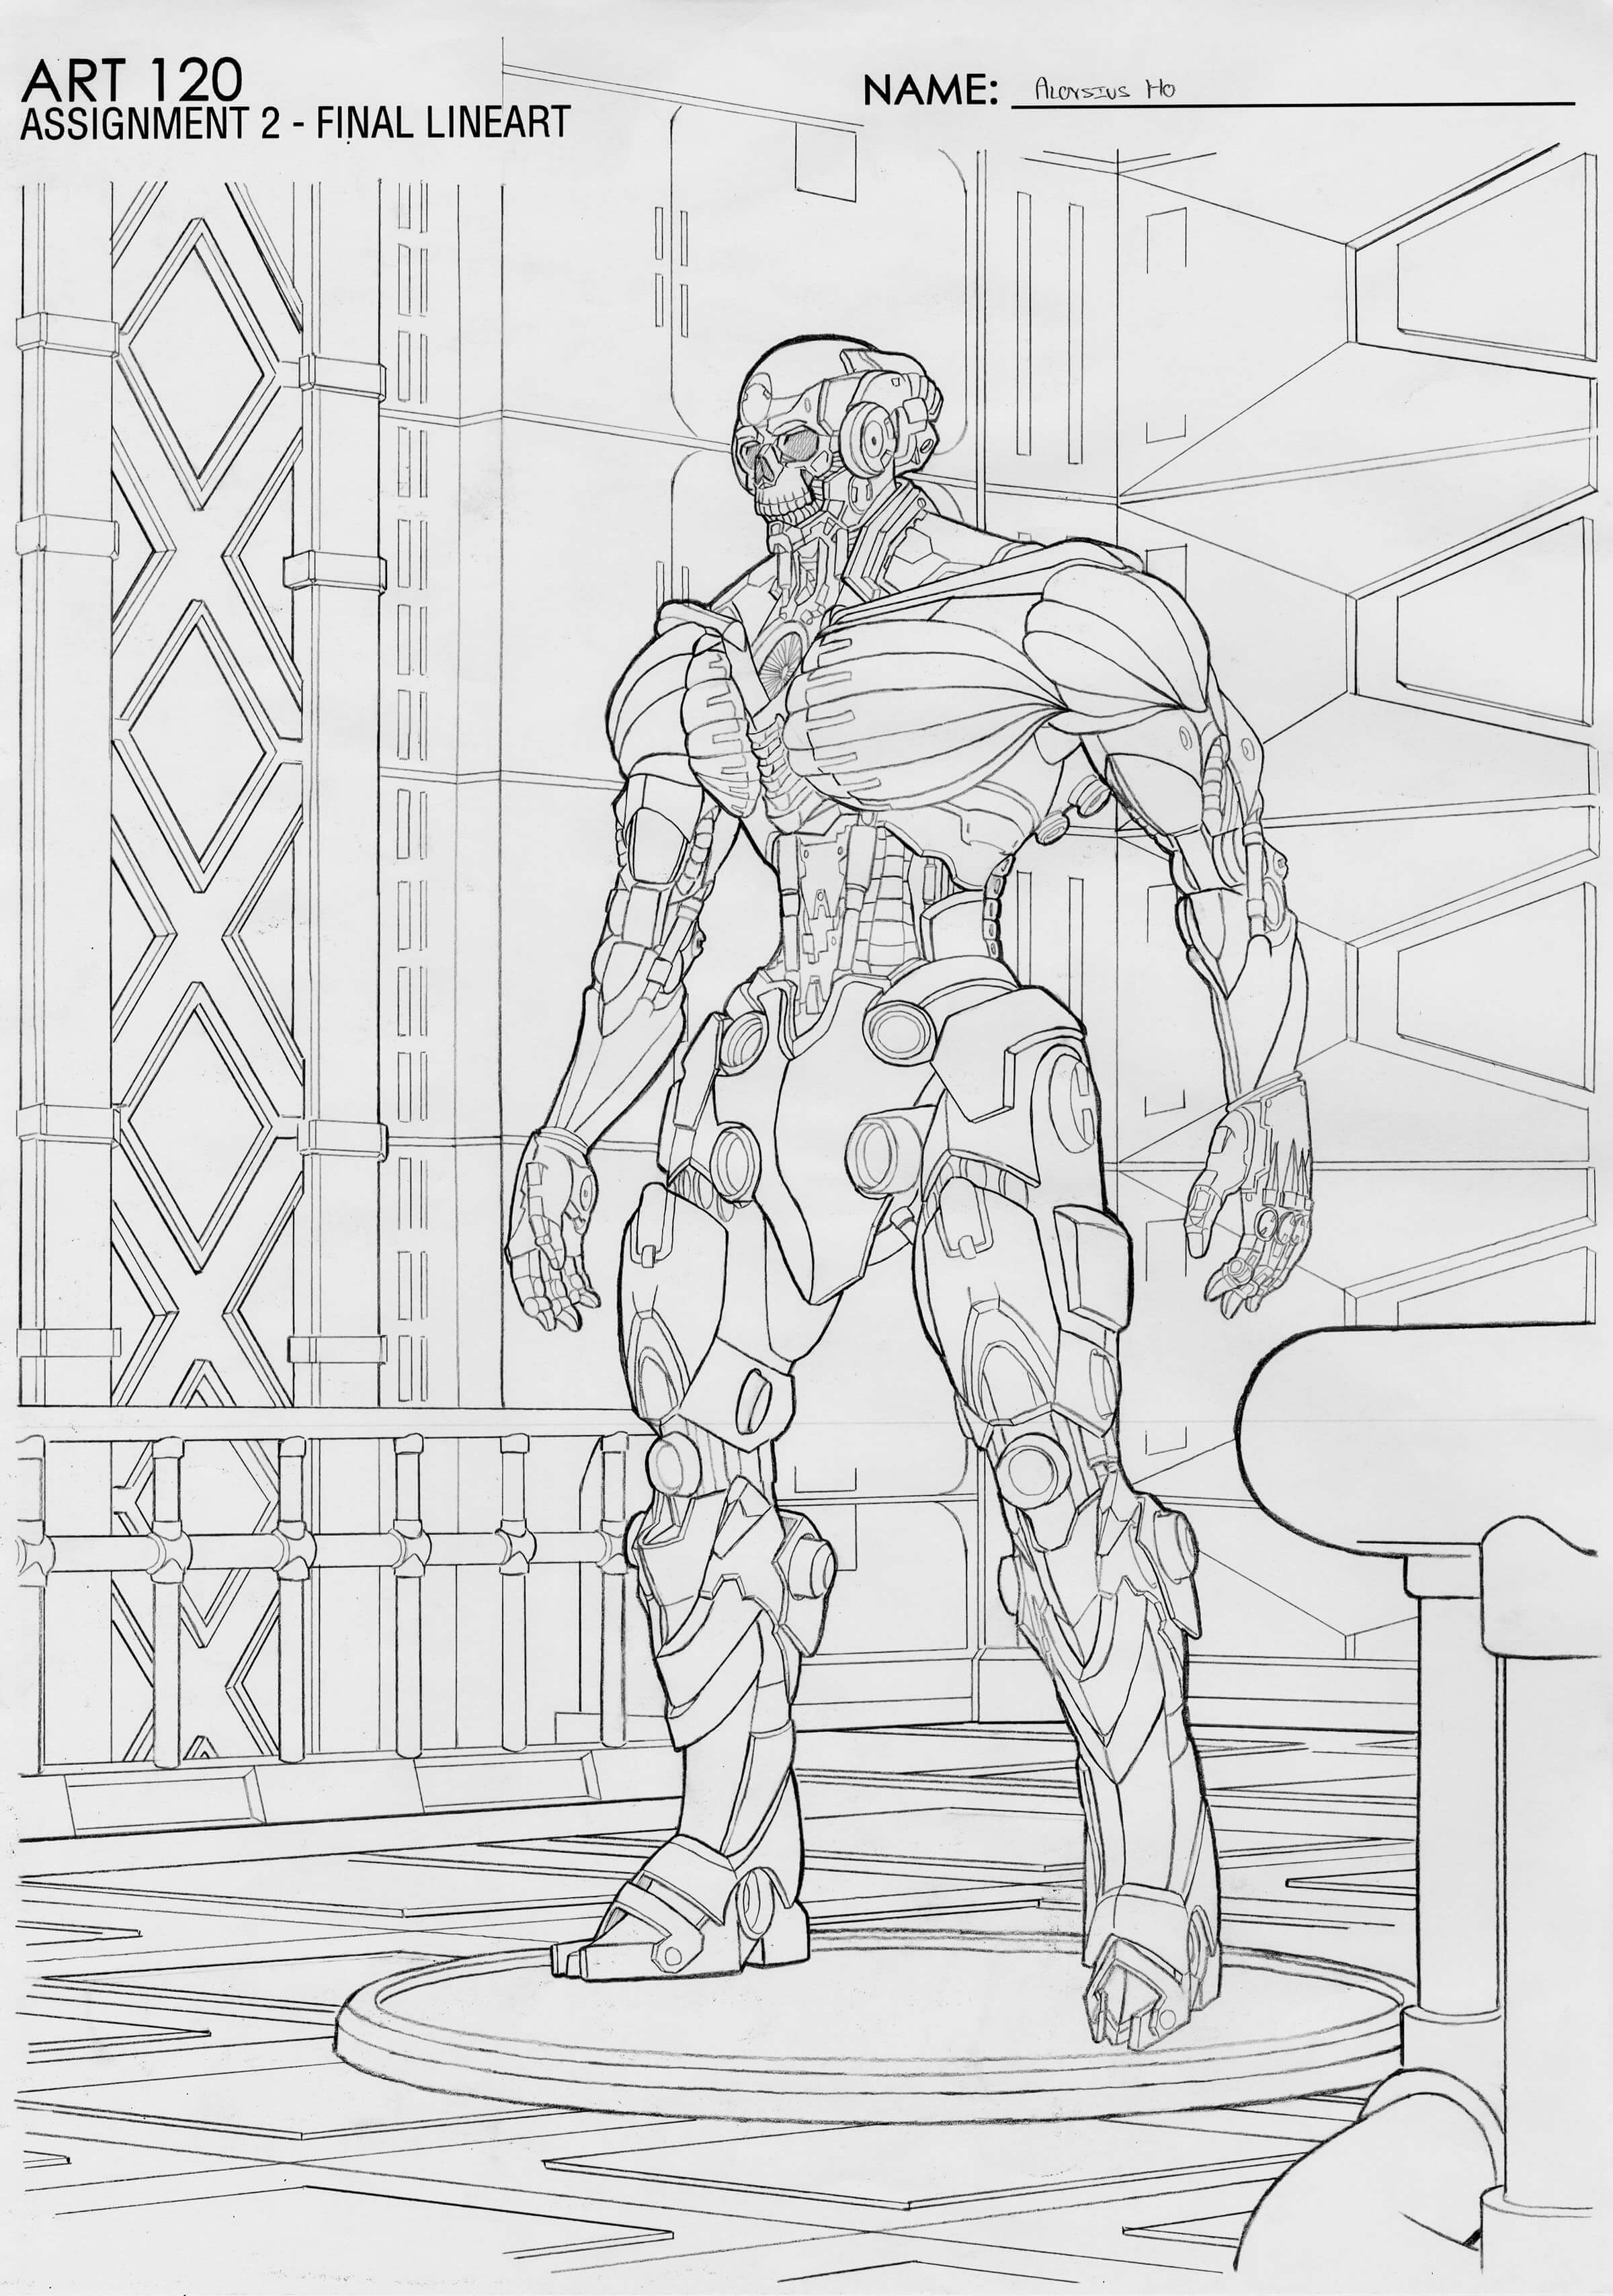 Black-and-white sketch of a standing robot with an exposed human-like skull.